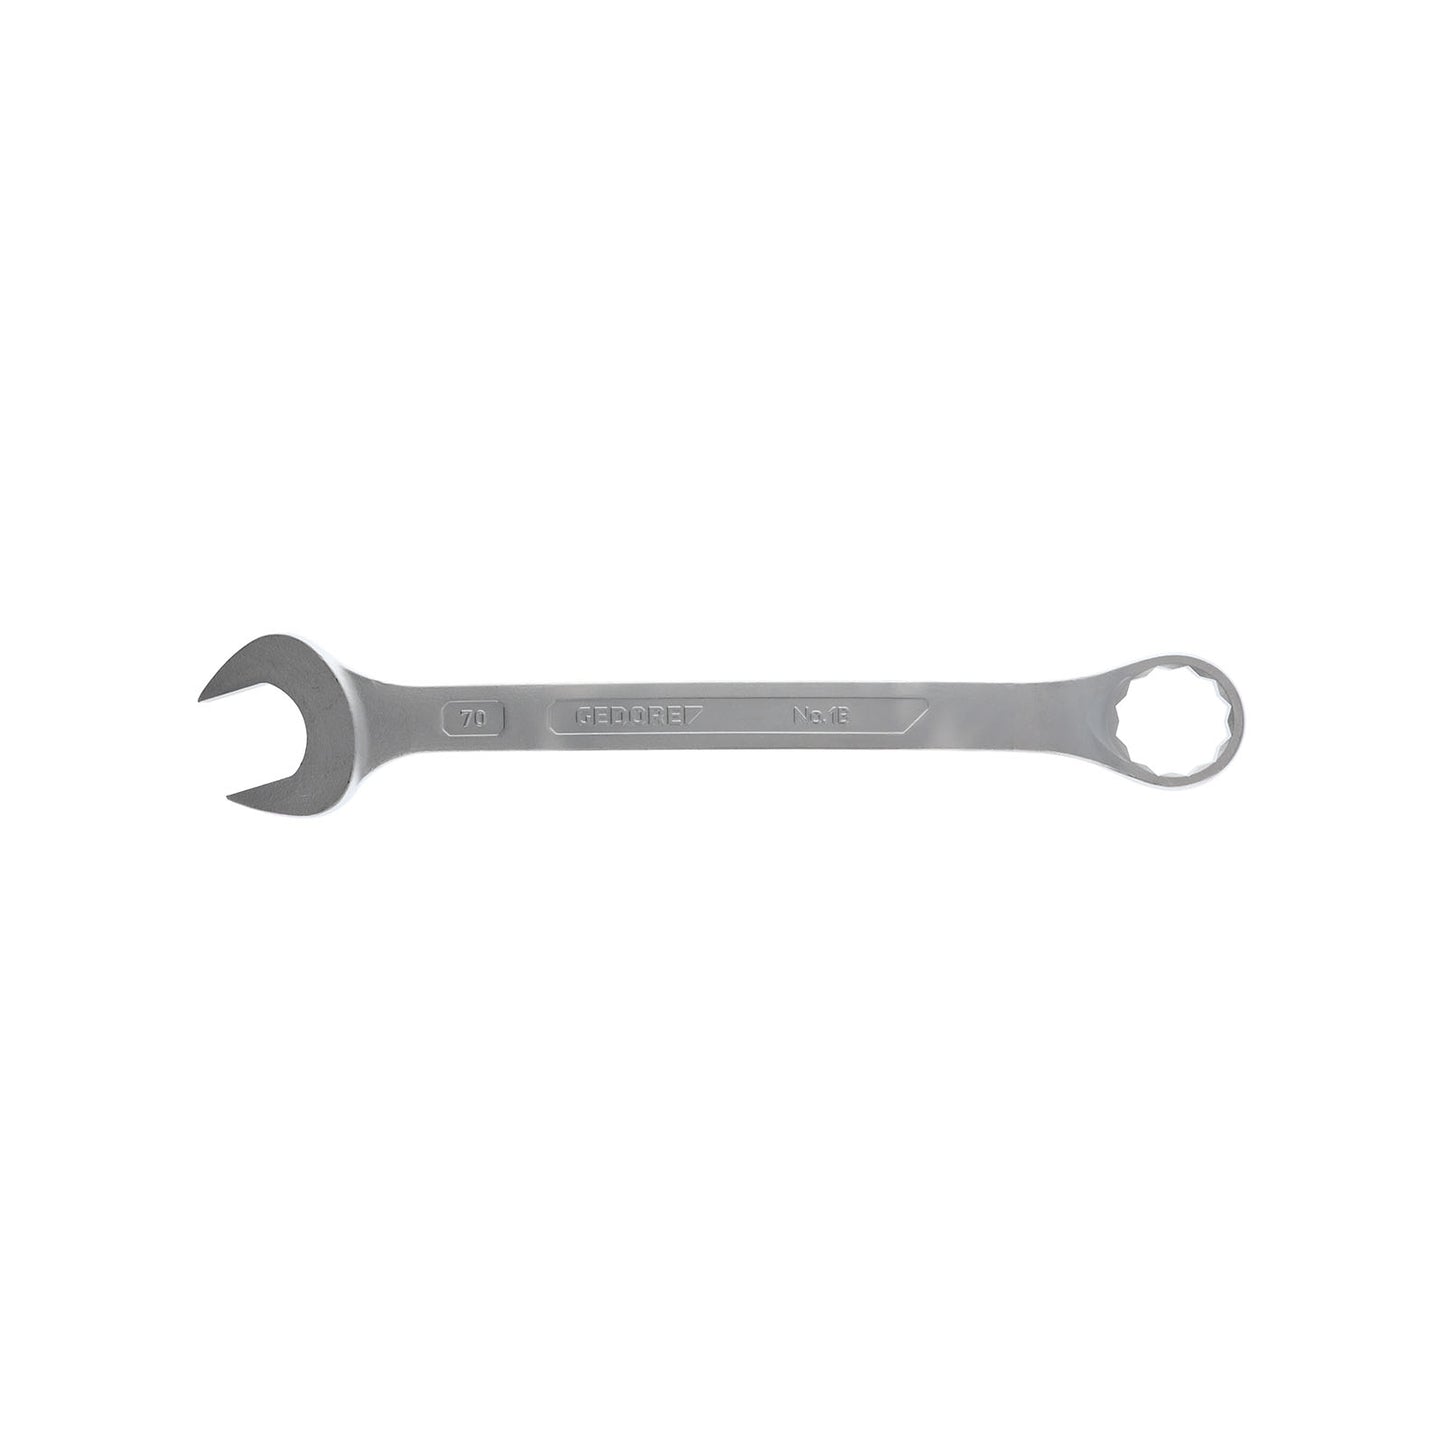 GEDORE 1 B 70 - Offset Combination Wrench, 70mm (6004740)